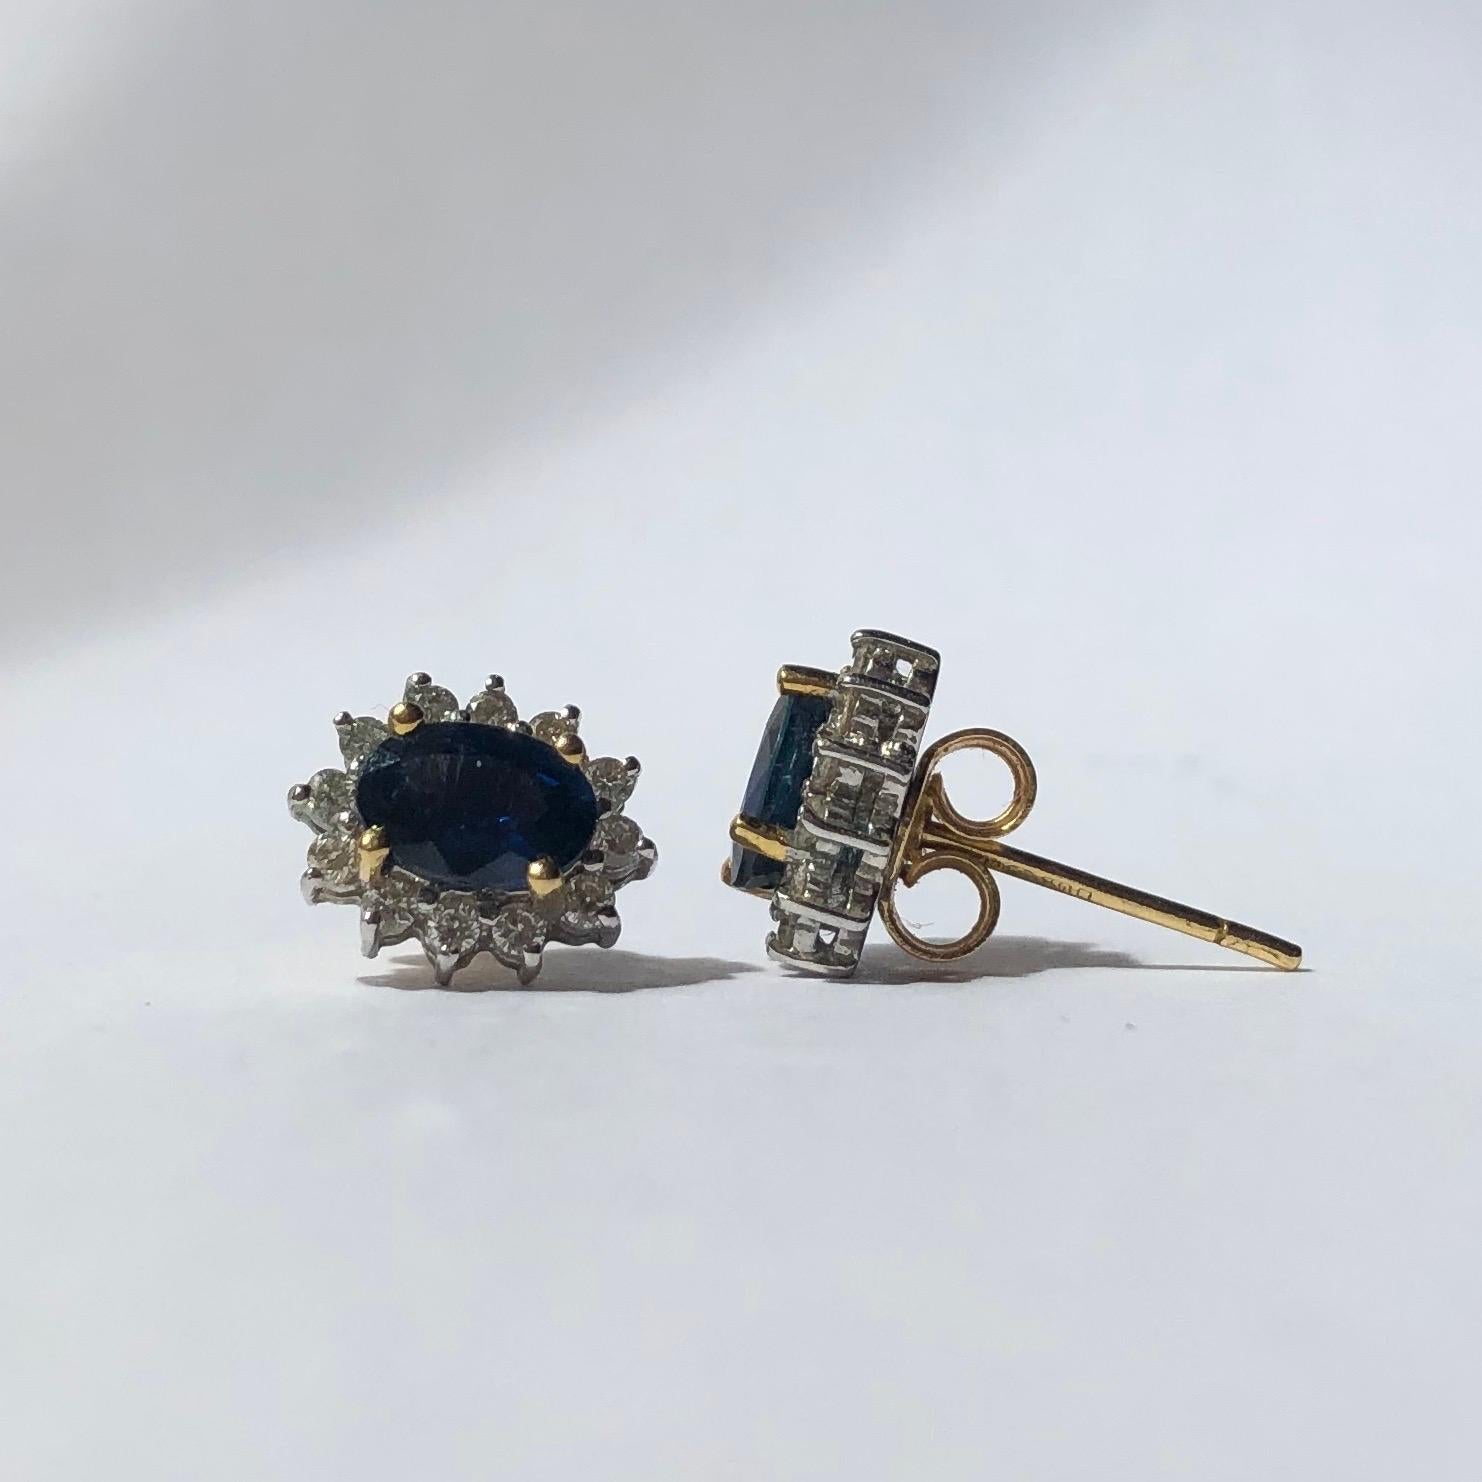 This pair of exquisite earrings each hold a deep blue sapphire measuring 50pts and the gorgeous stones are surrounded by a halo of diamond. Each diamond measures 2pts each. When the sunlight hits the sapphires there is a bright blue hue that can be